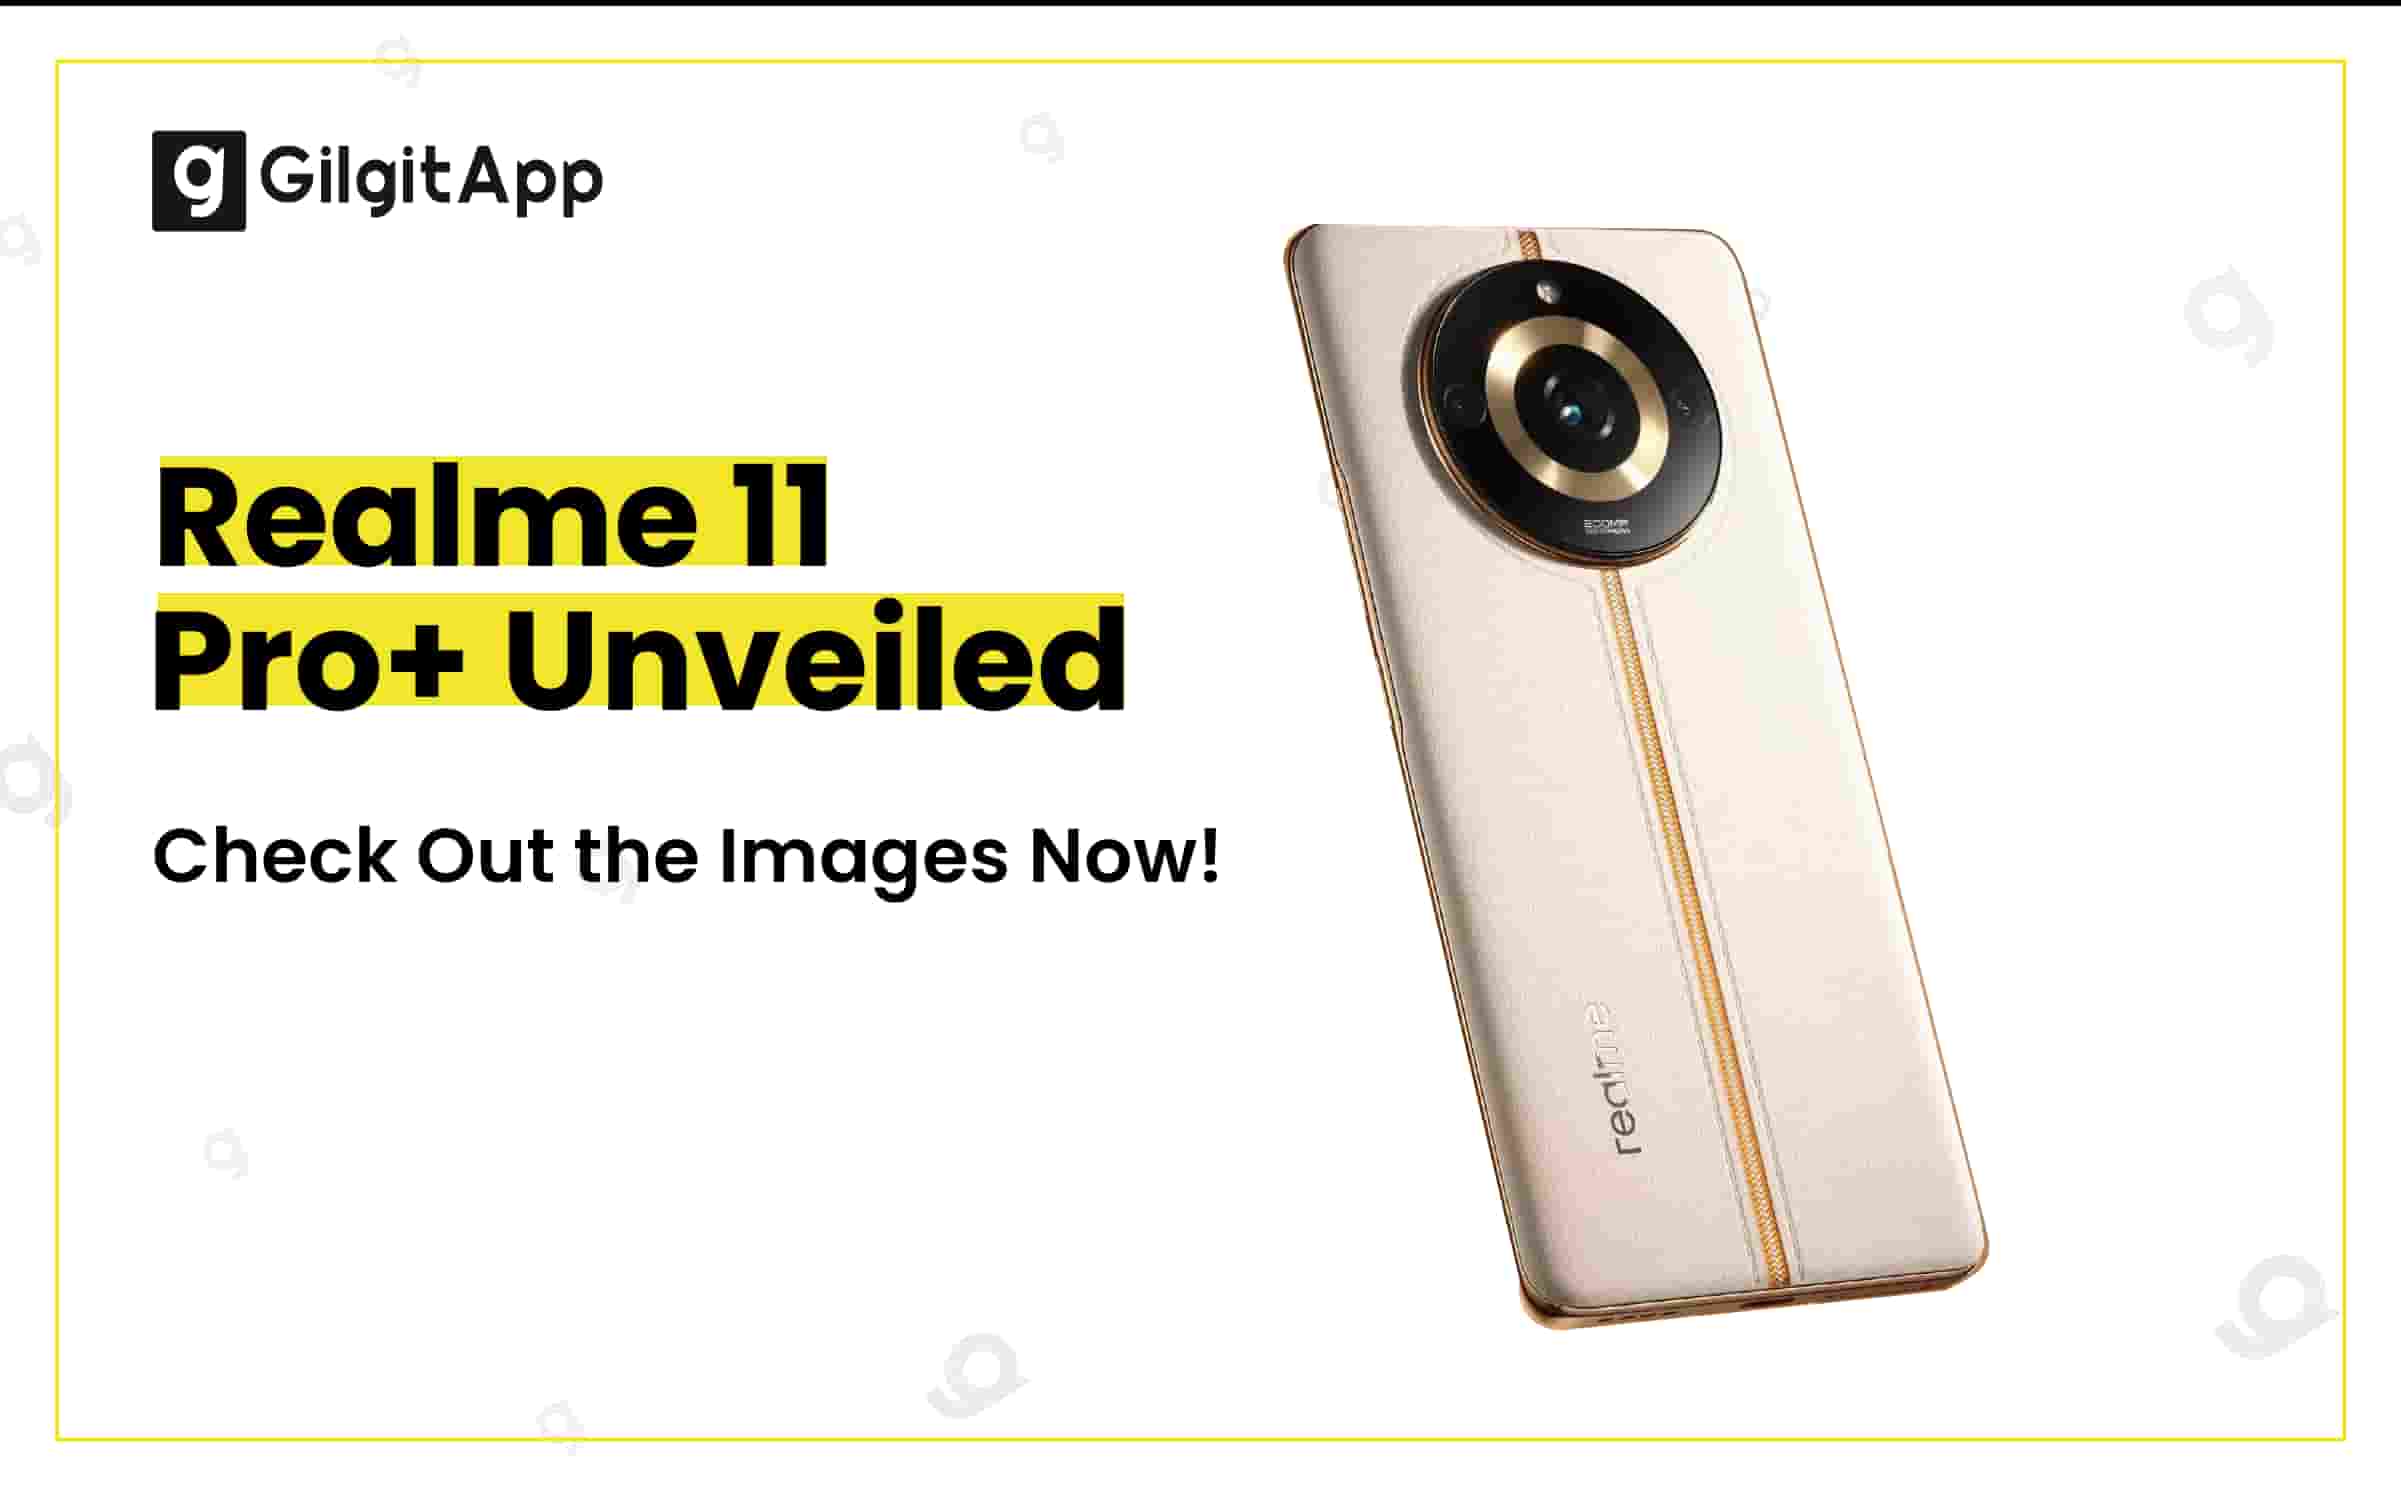 Realme 11 Pro+ Unveiled - Check Out the Images Now!